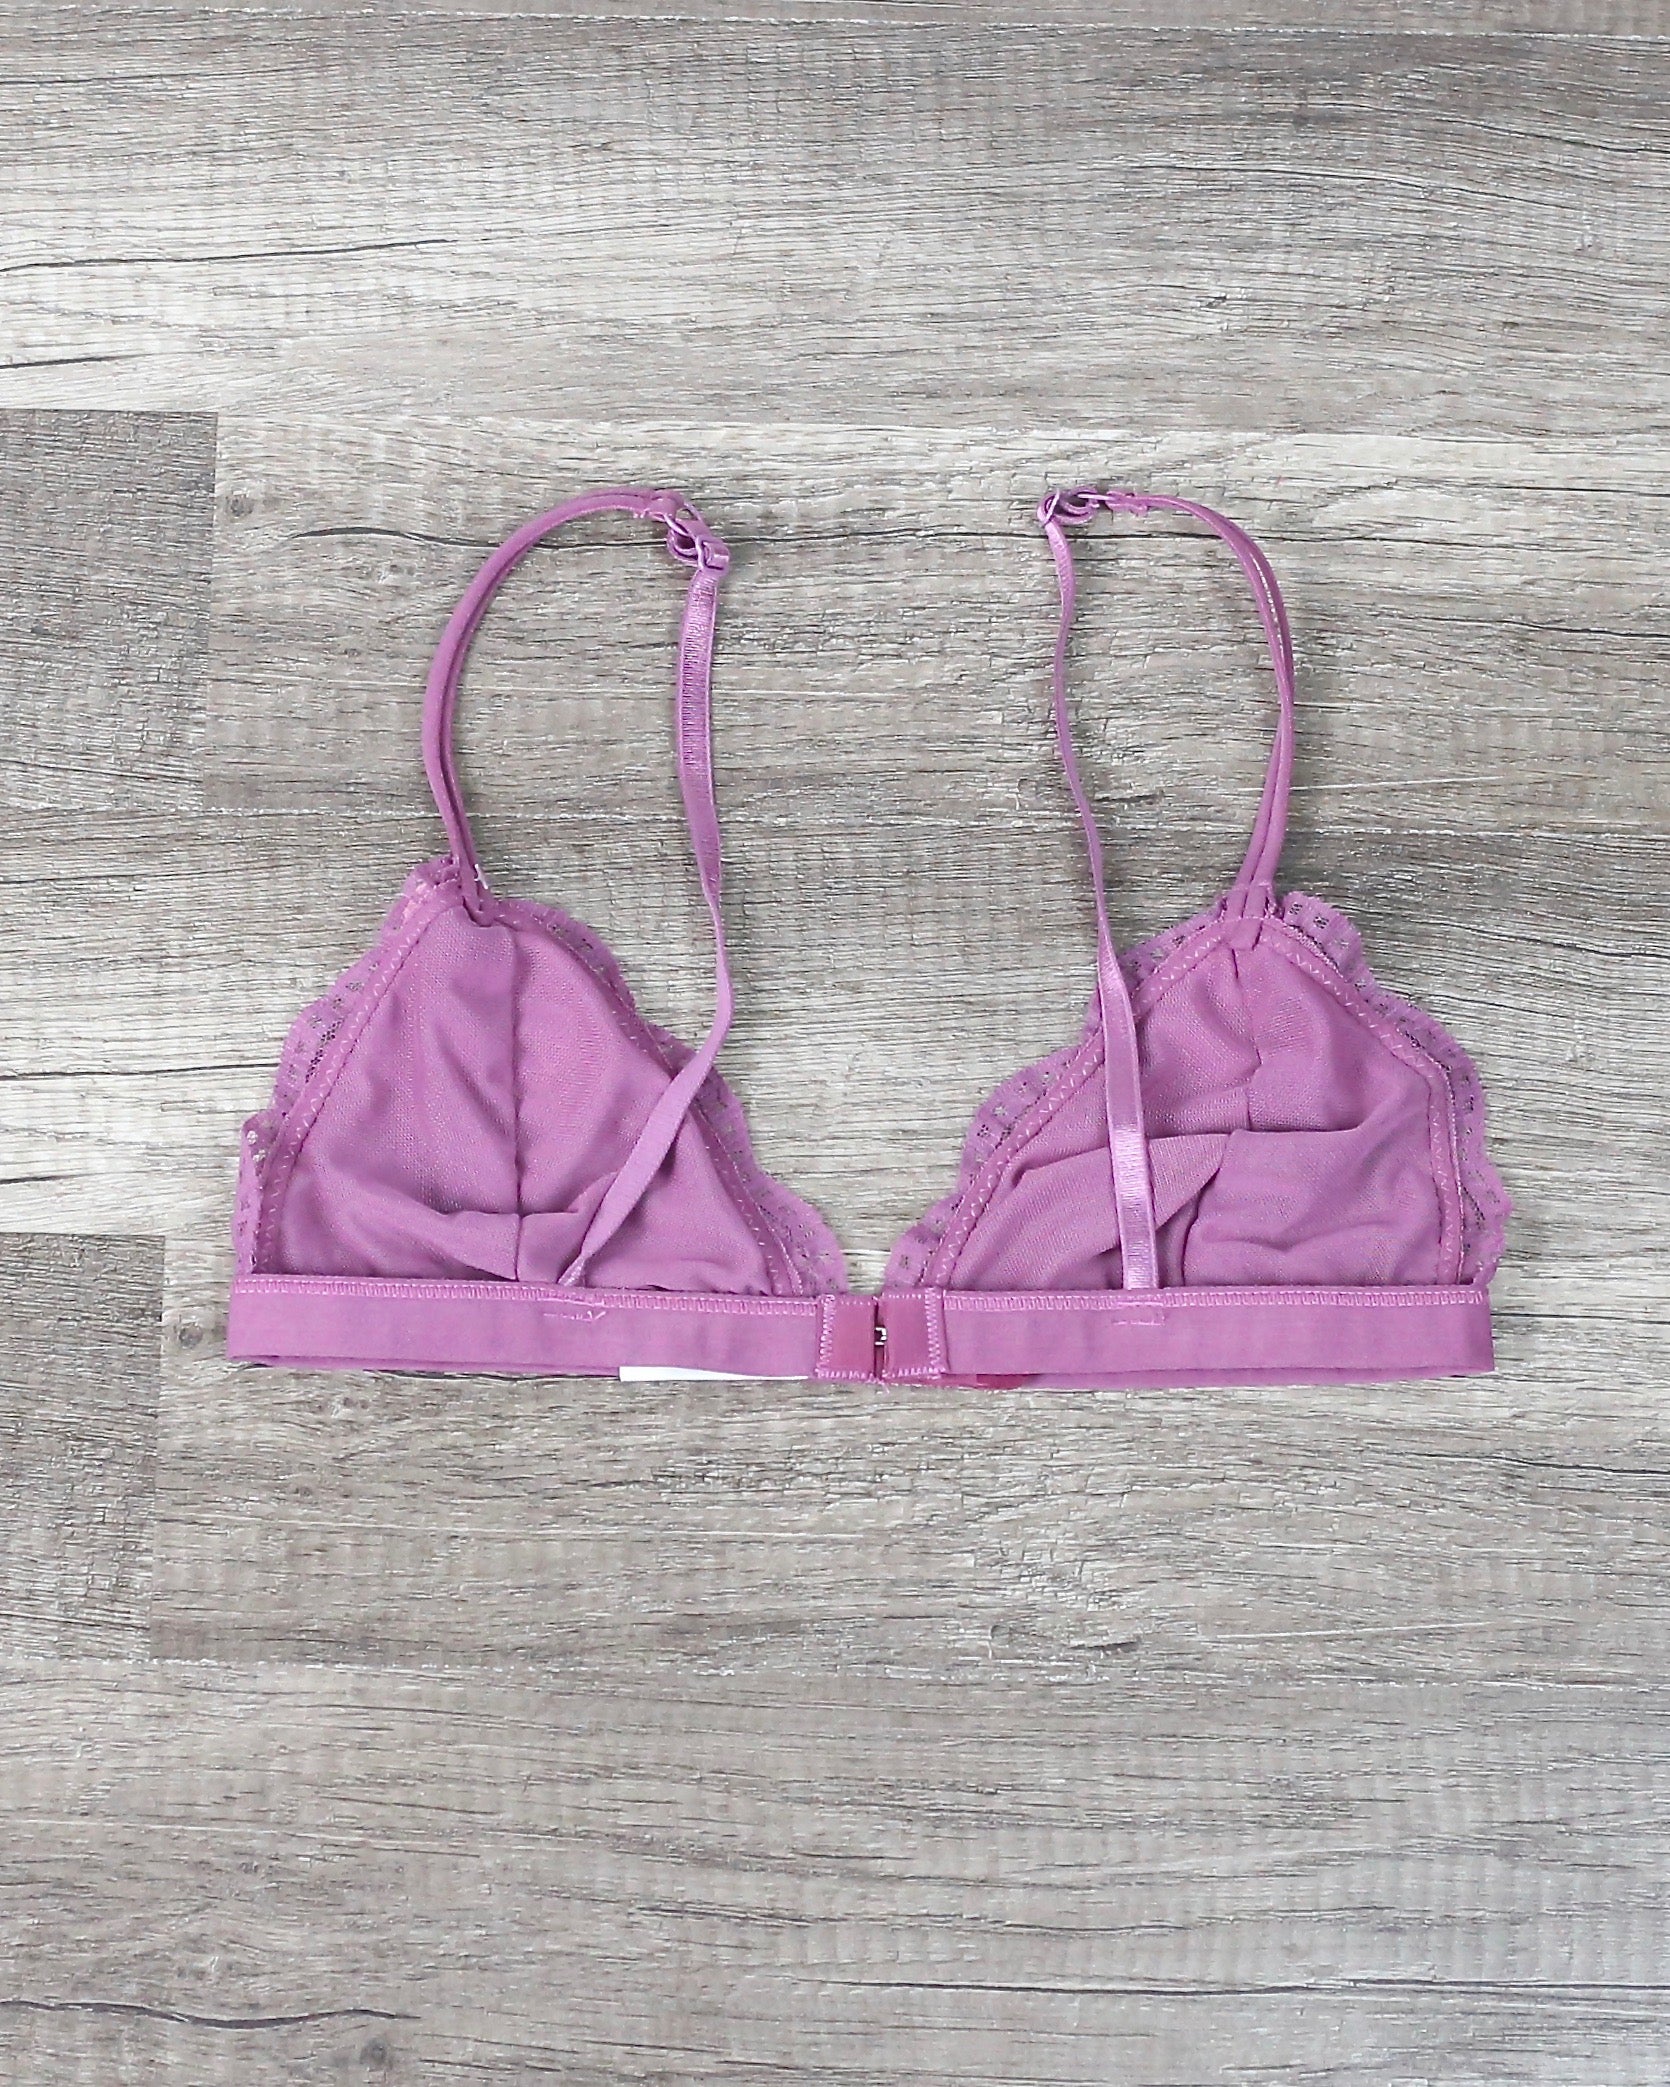 Intimates Delicate Lacy Bralettes In More Colors – Shop Hearts